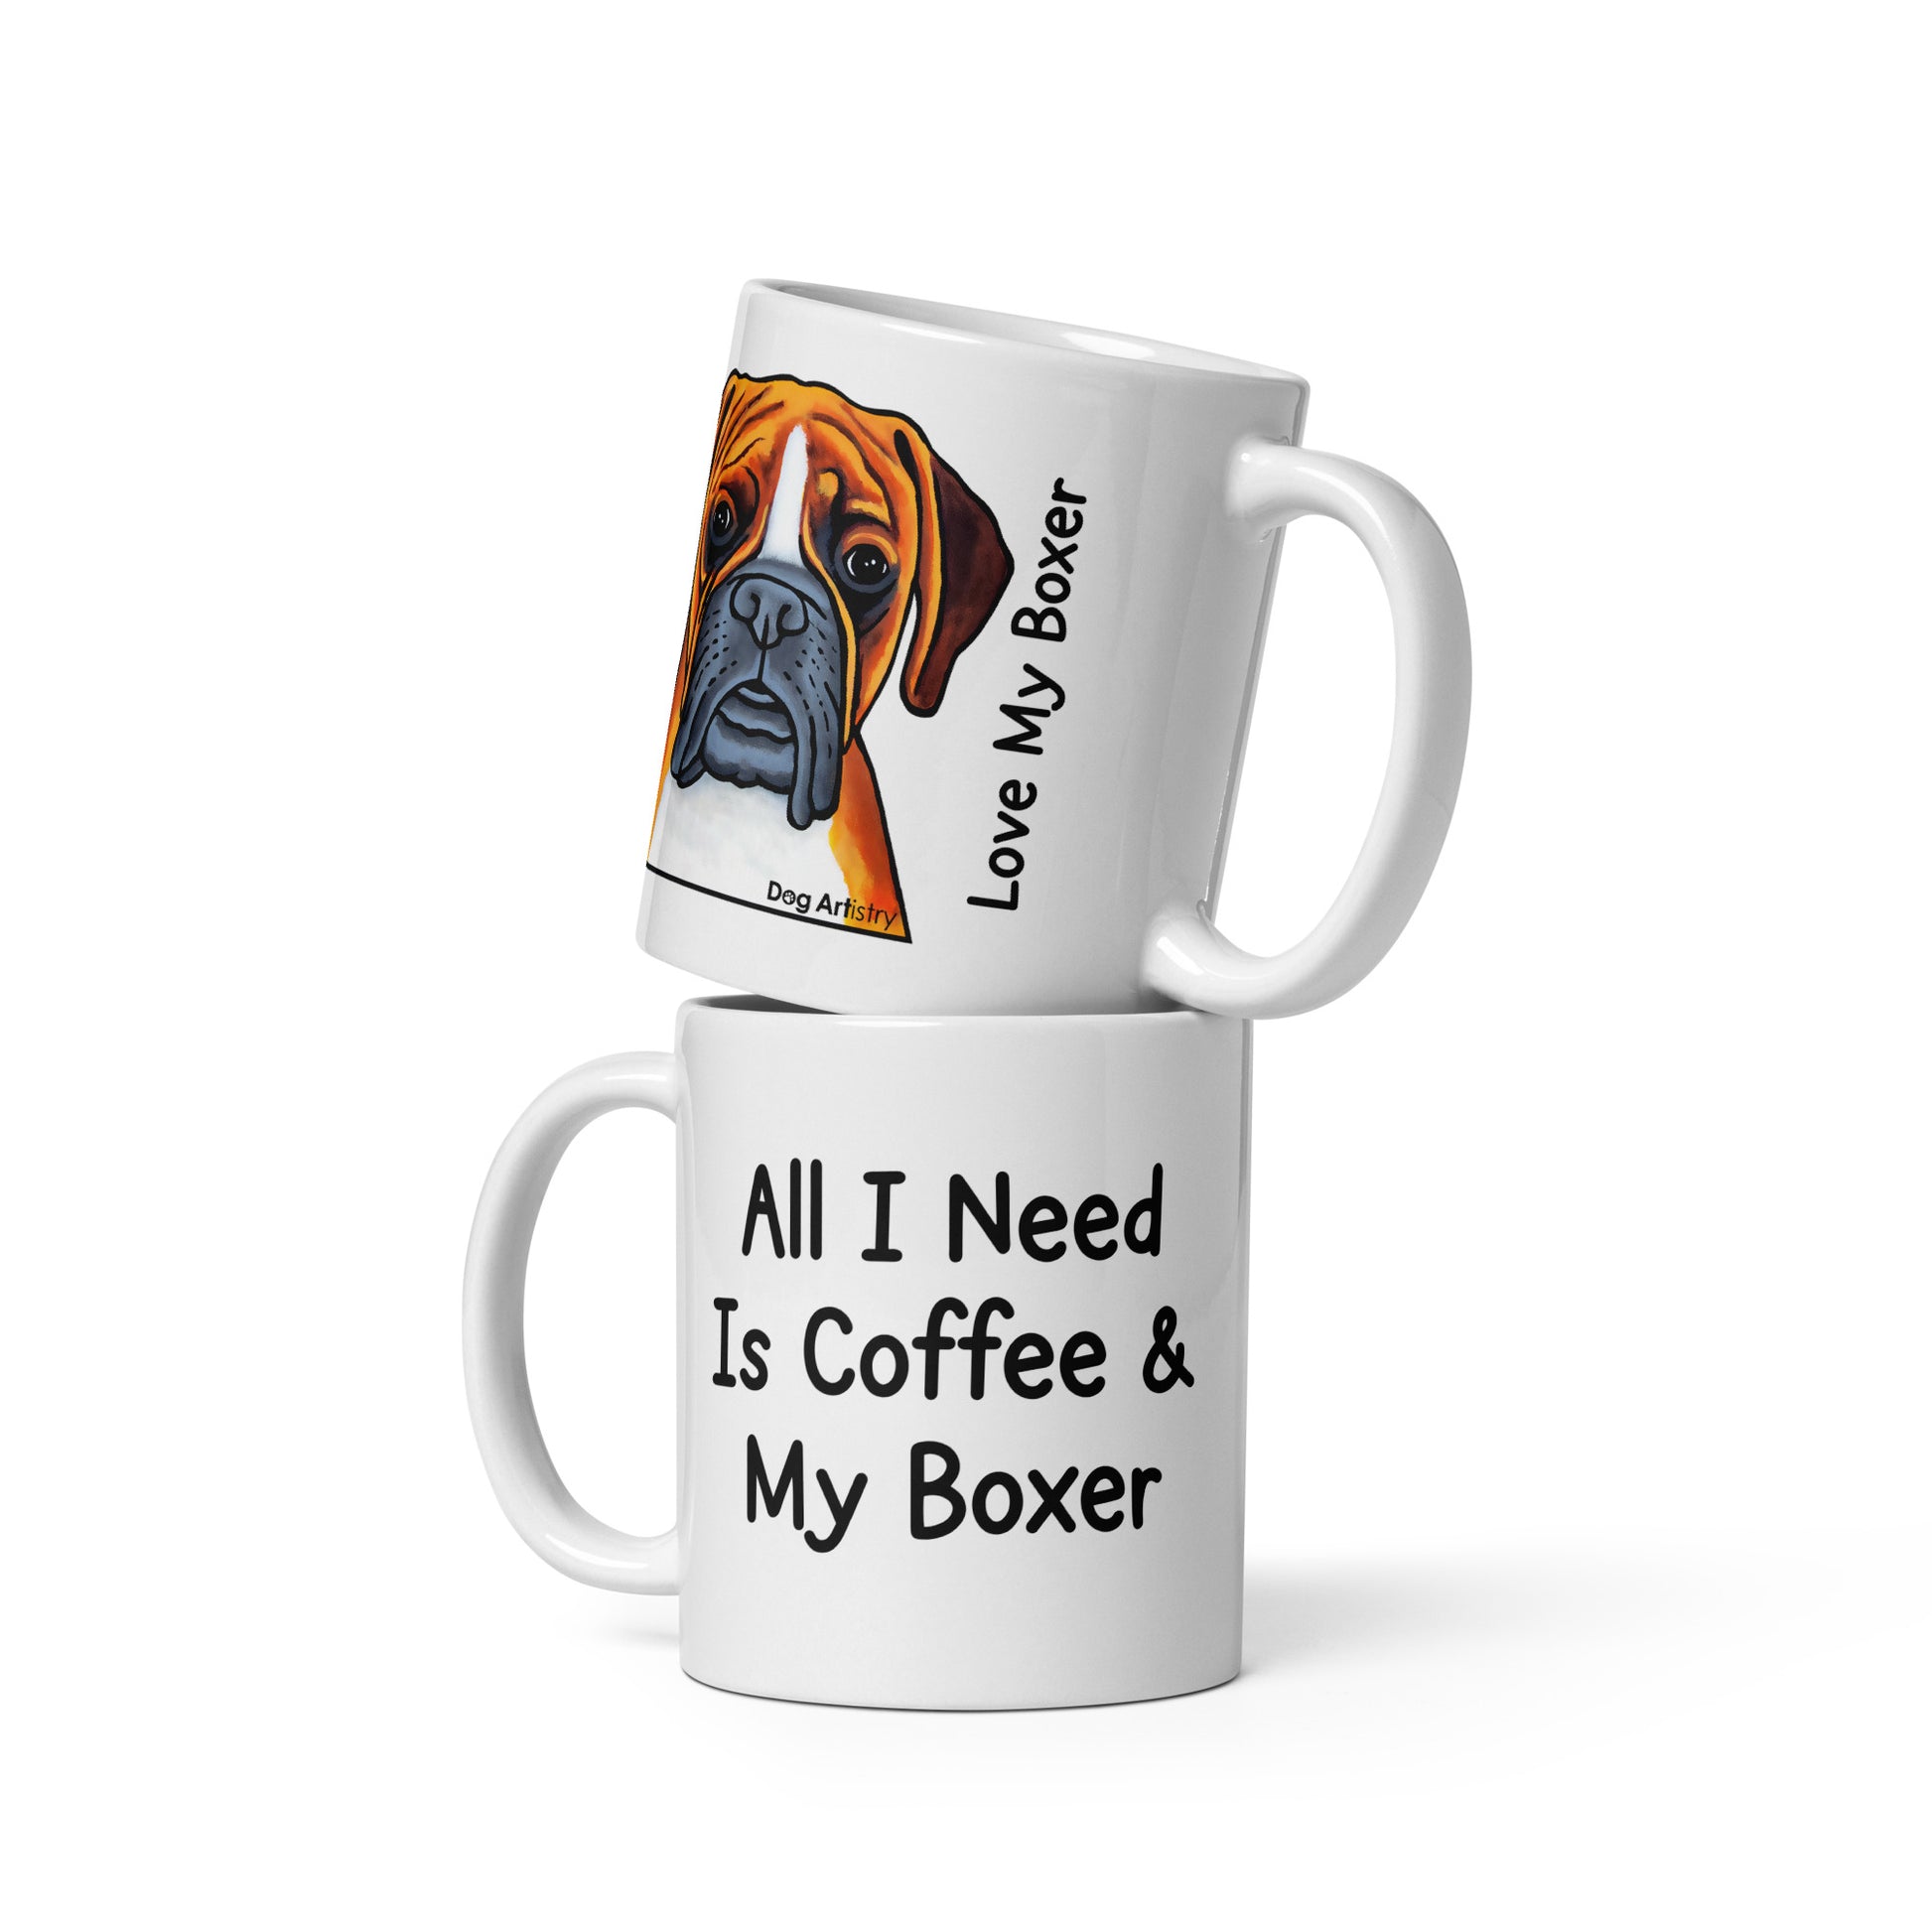 All I need is coffee & my Boxer mug by Dog Artistry.